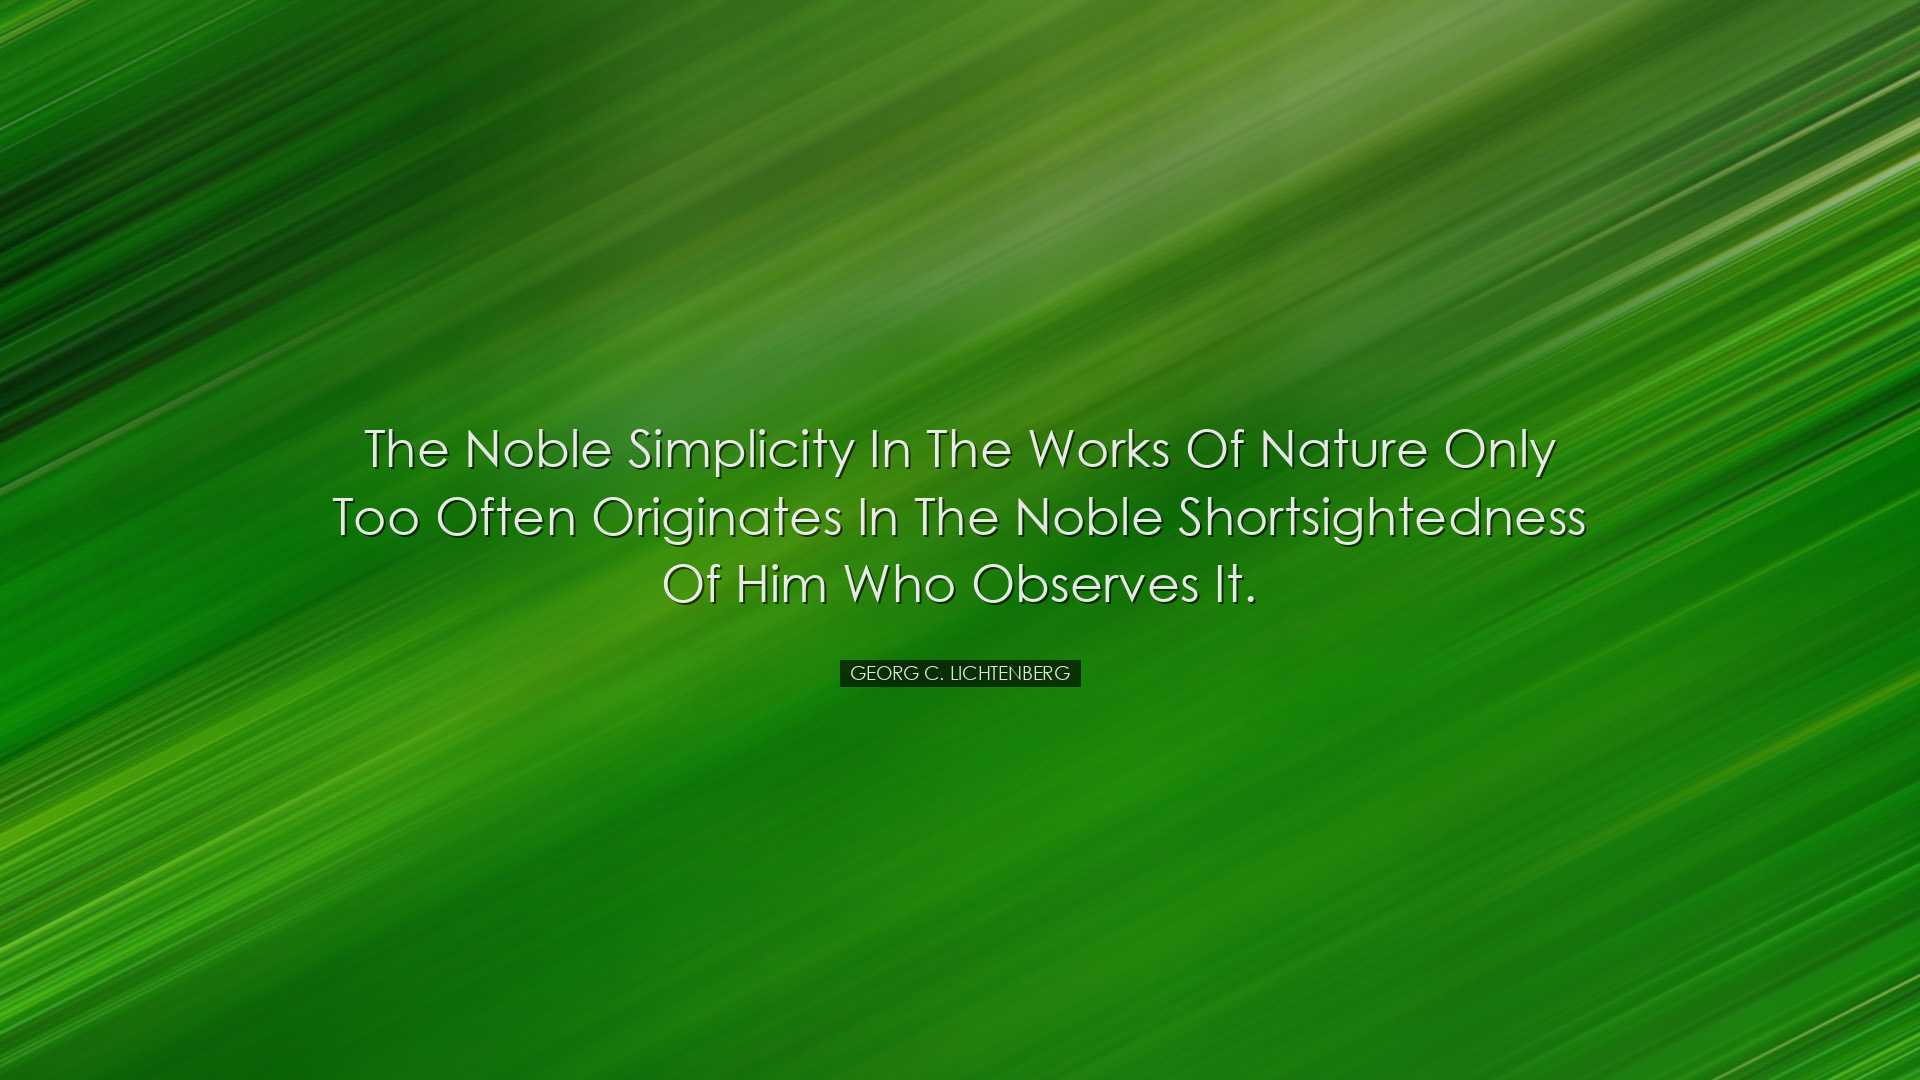 The noble simplicity in the works of nature only too often origina